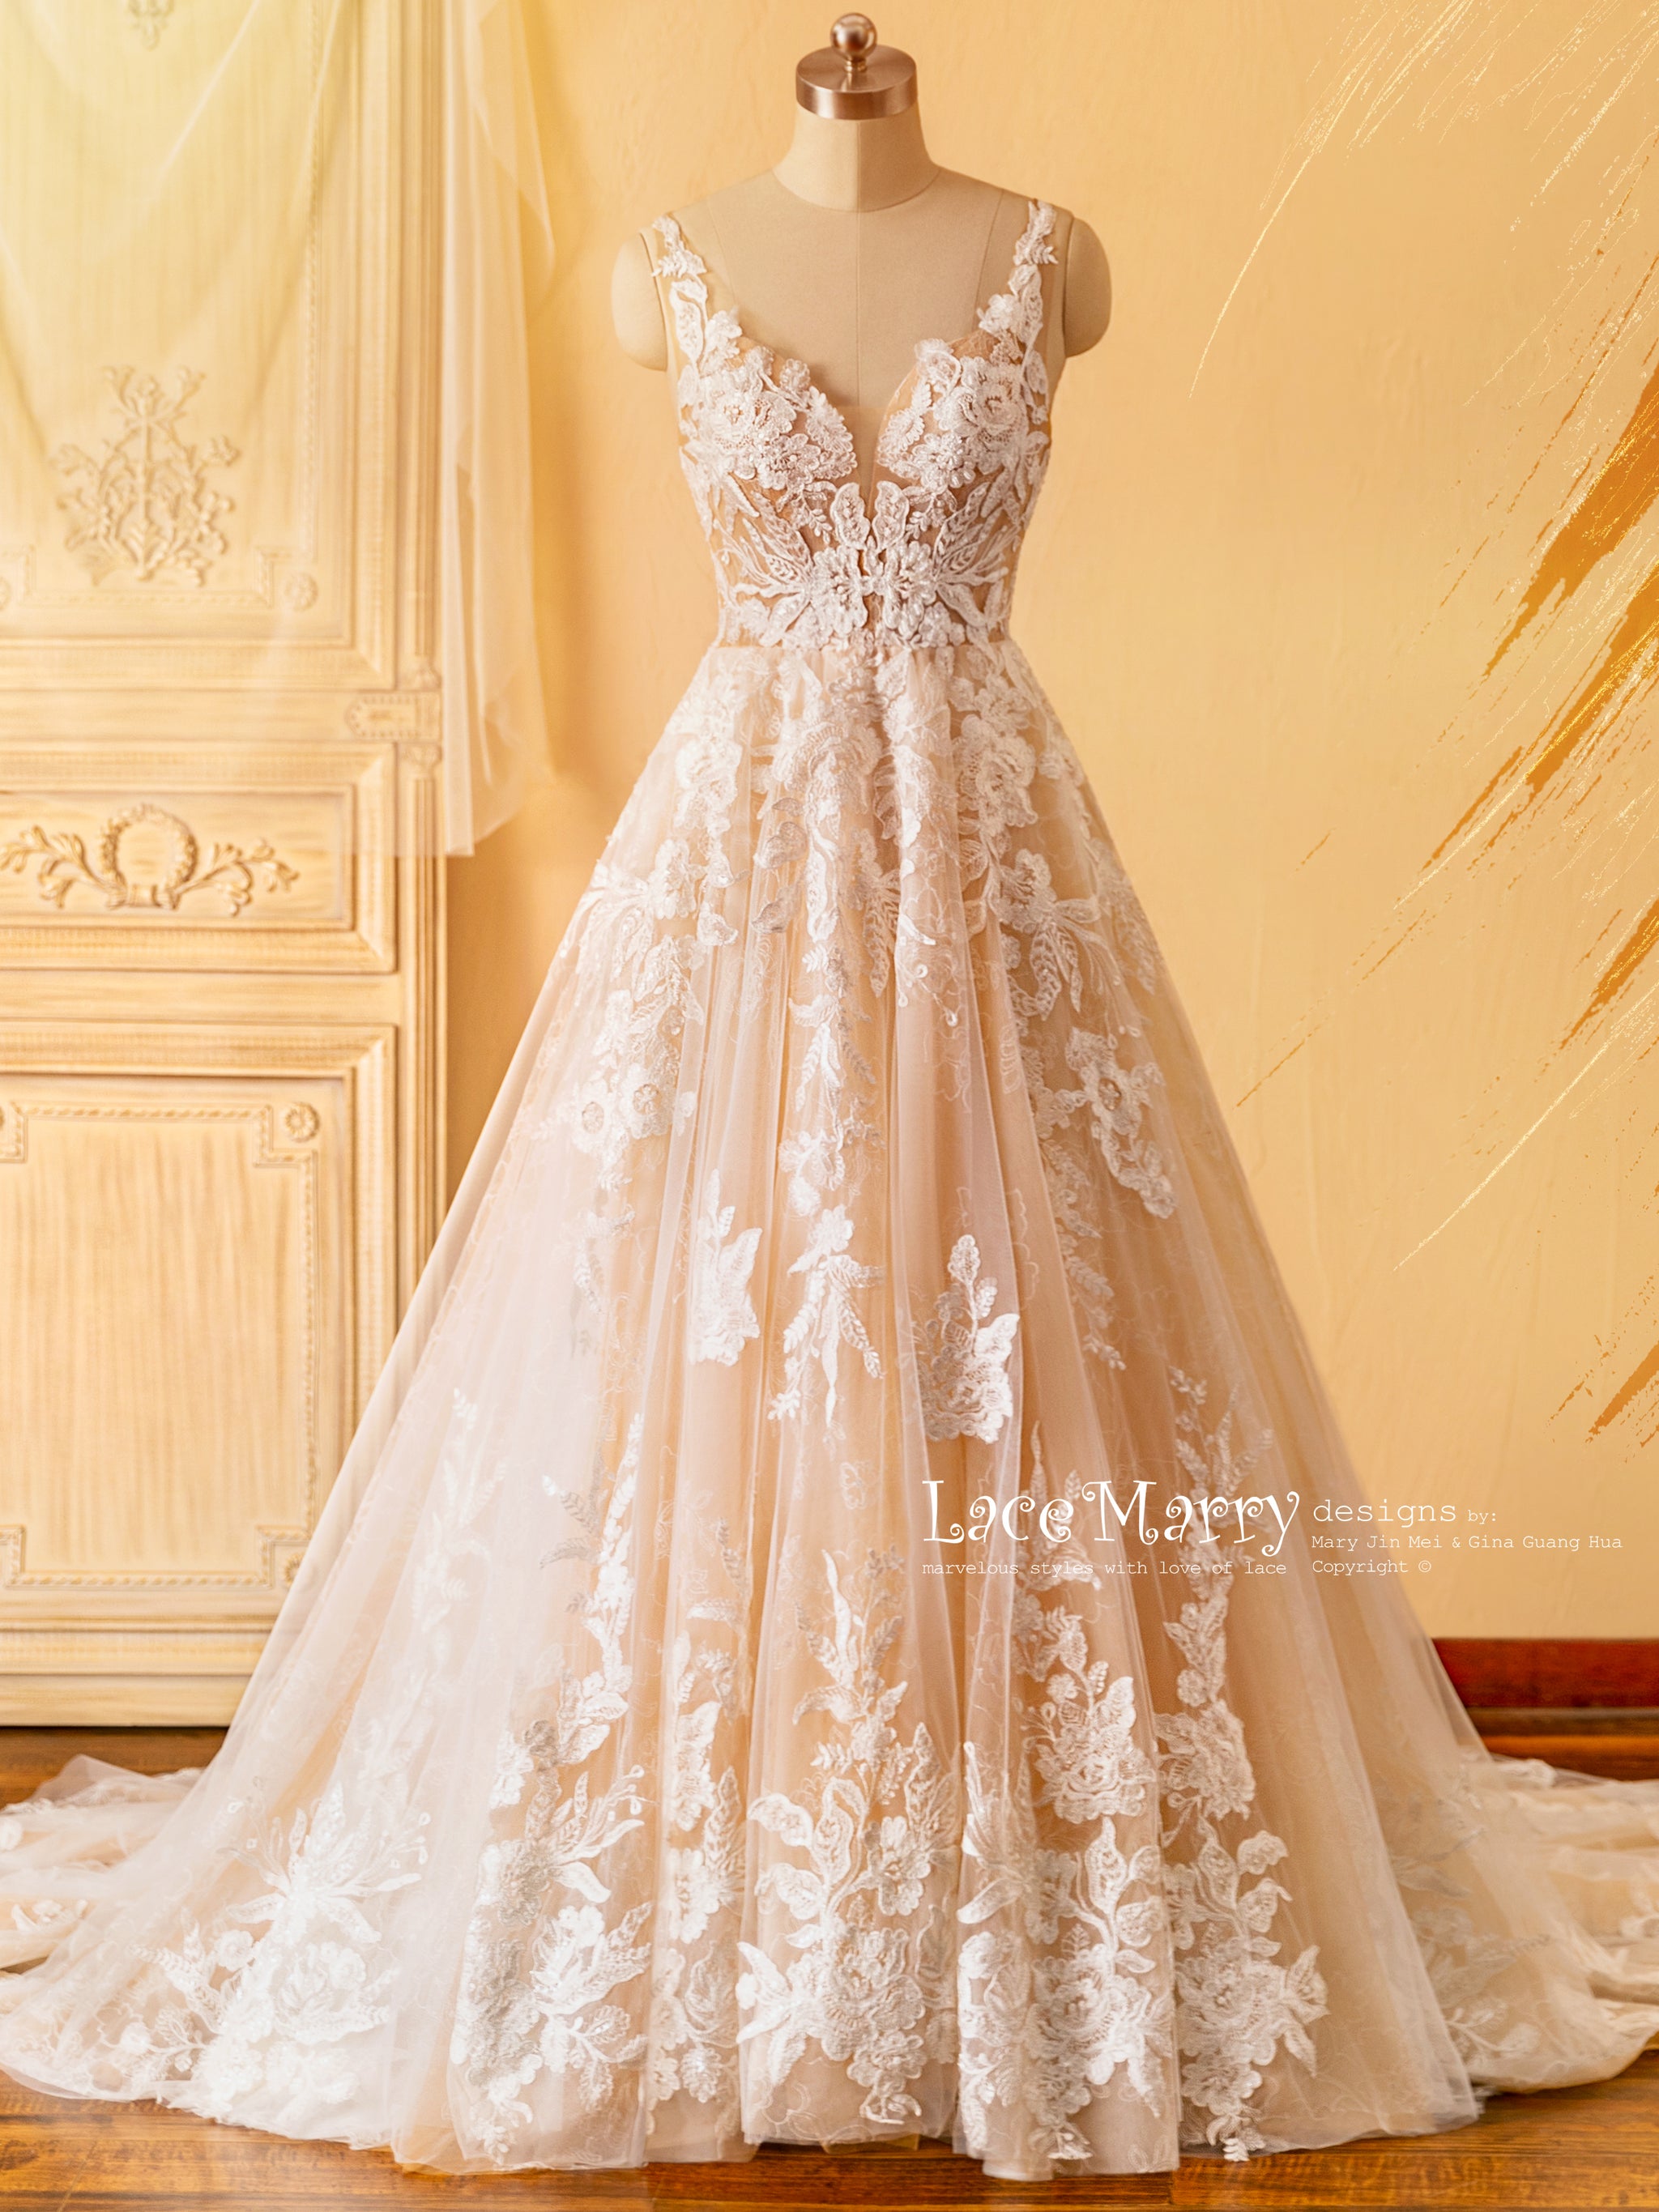 CELINE / Enchanting Lace Wedding Dress with Flower Embroidery